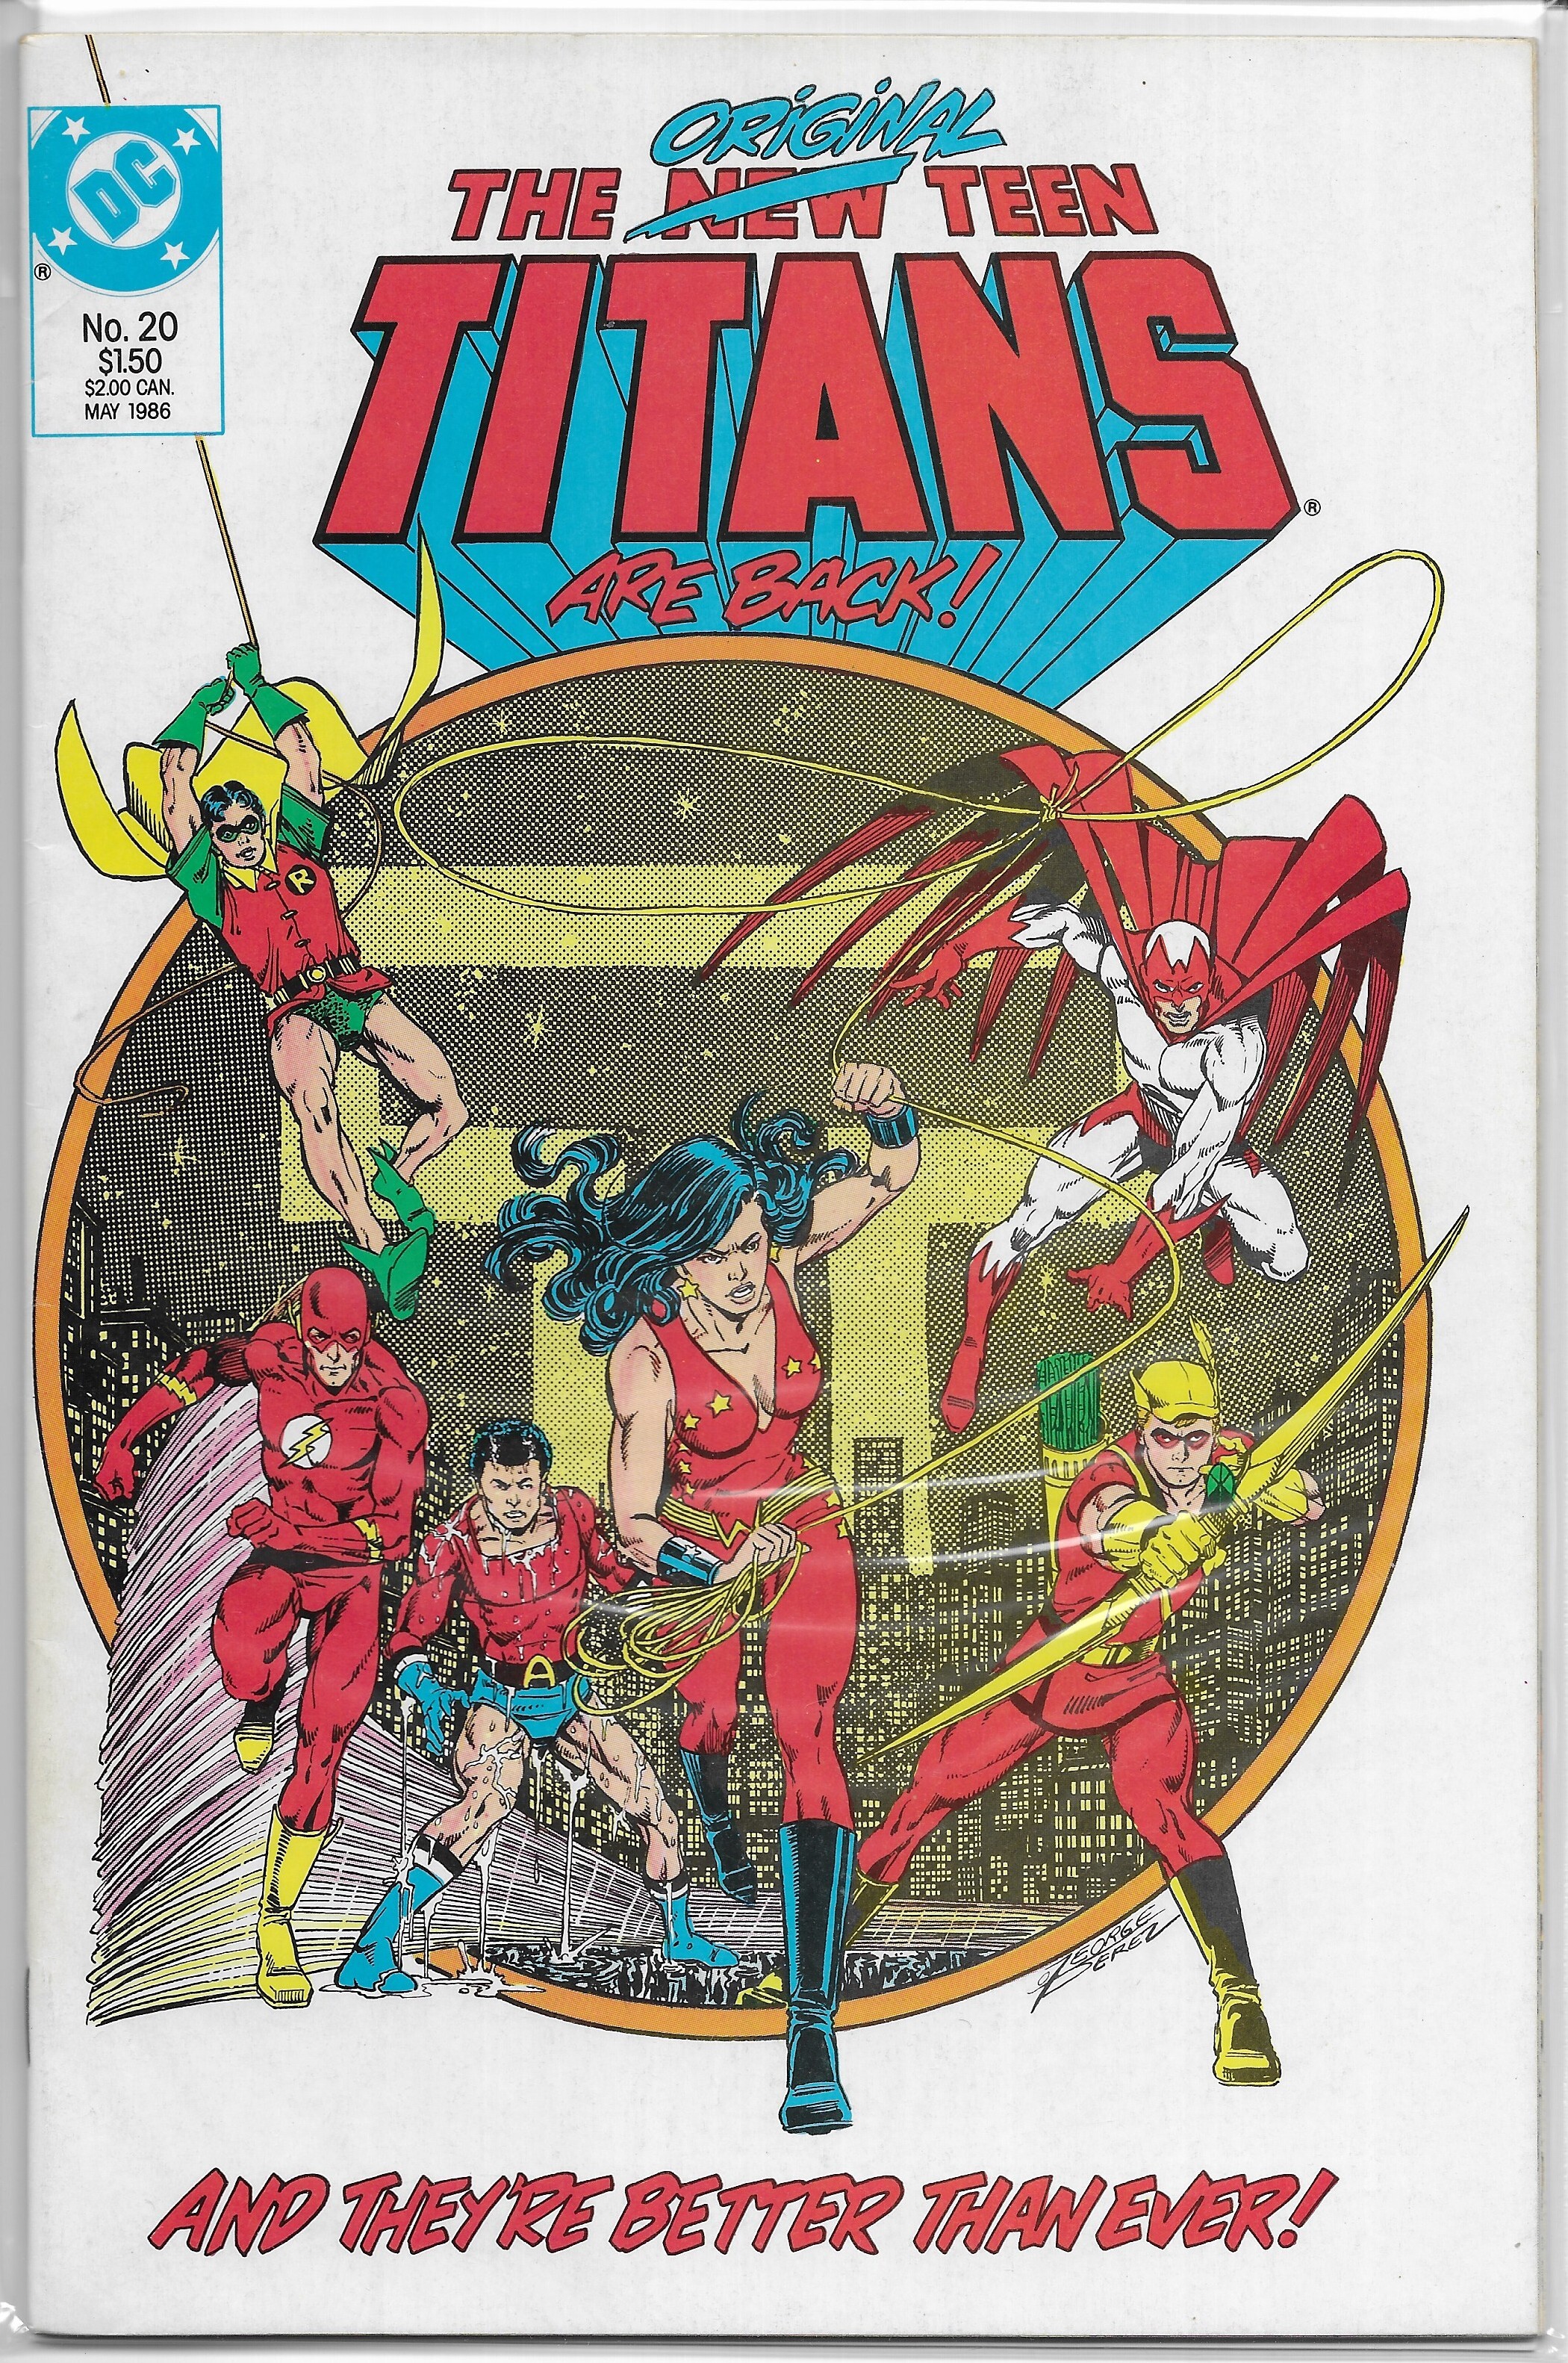 The New Teen Titans: Volume two [Book]